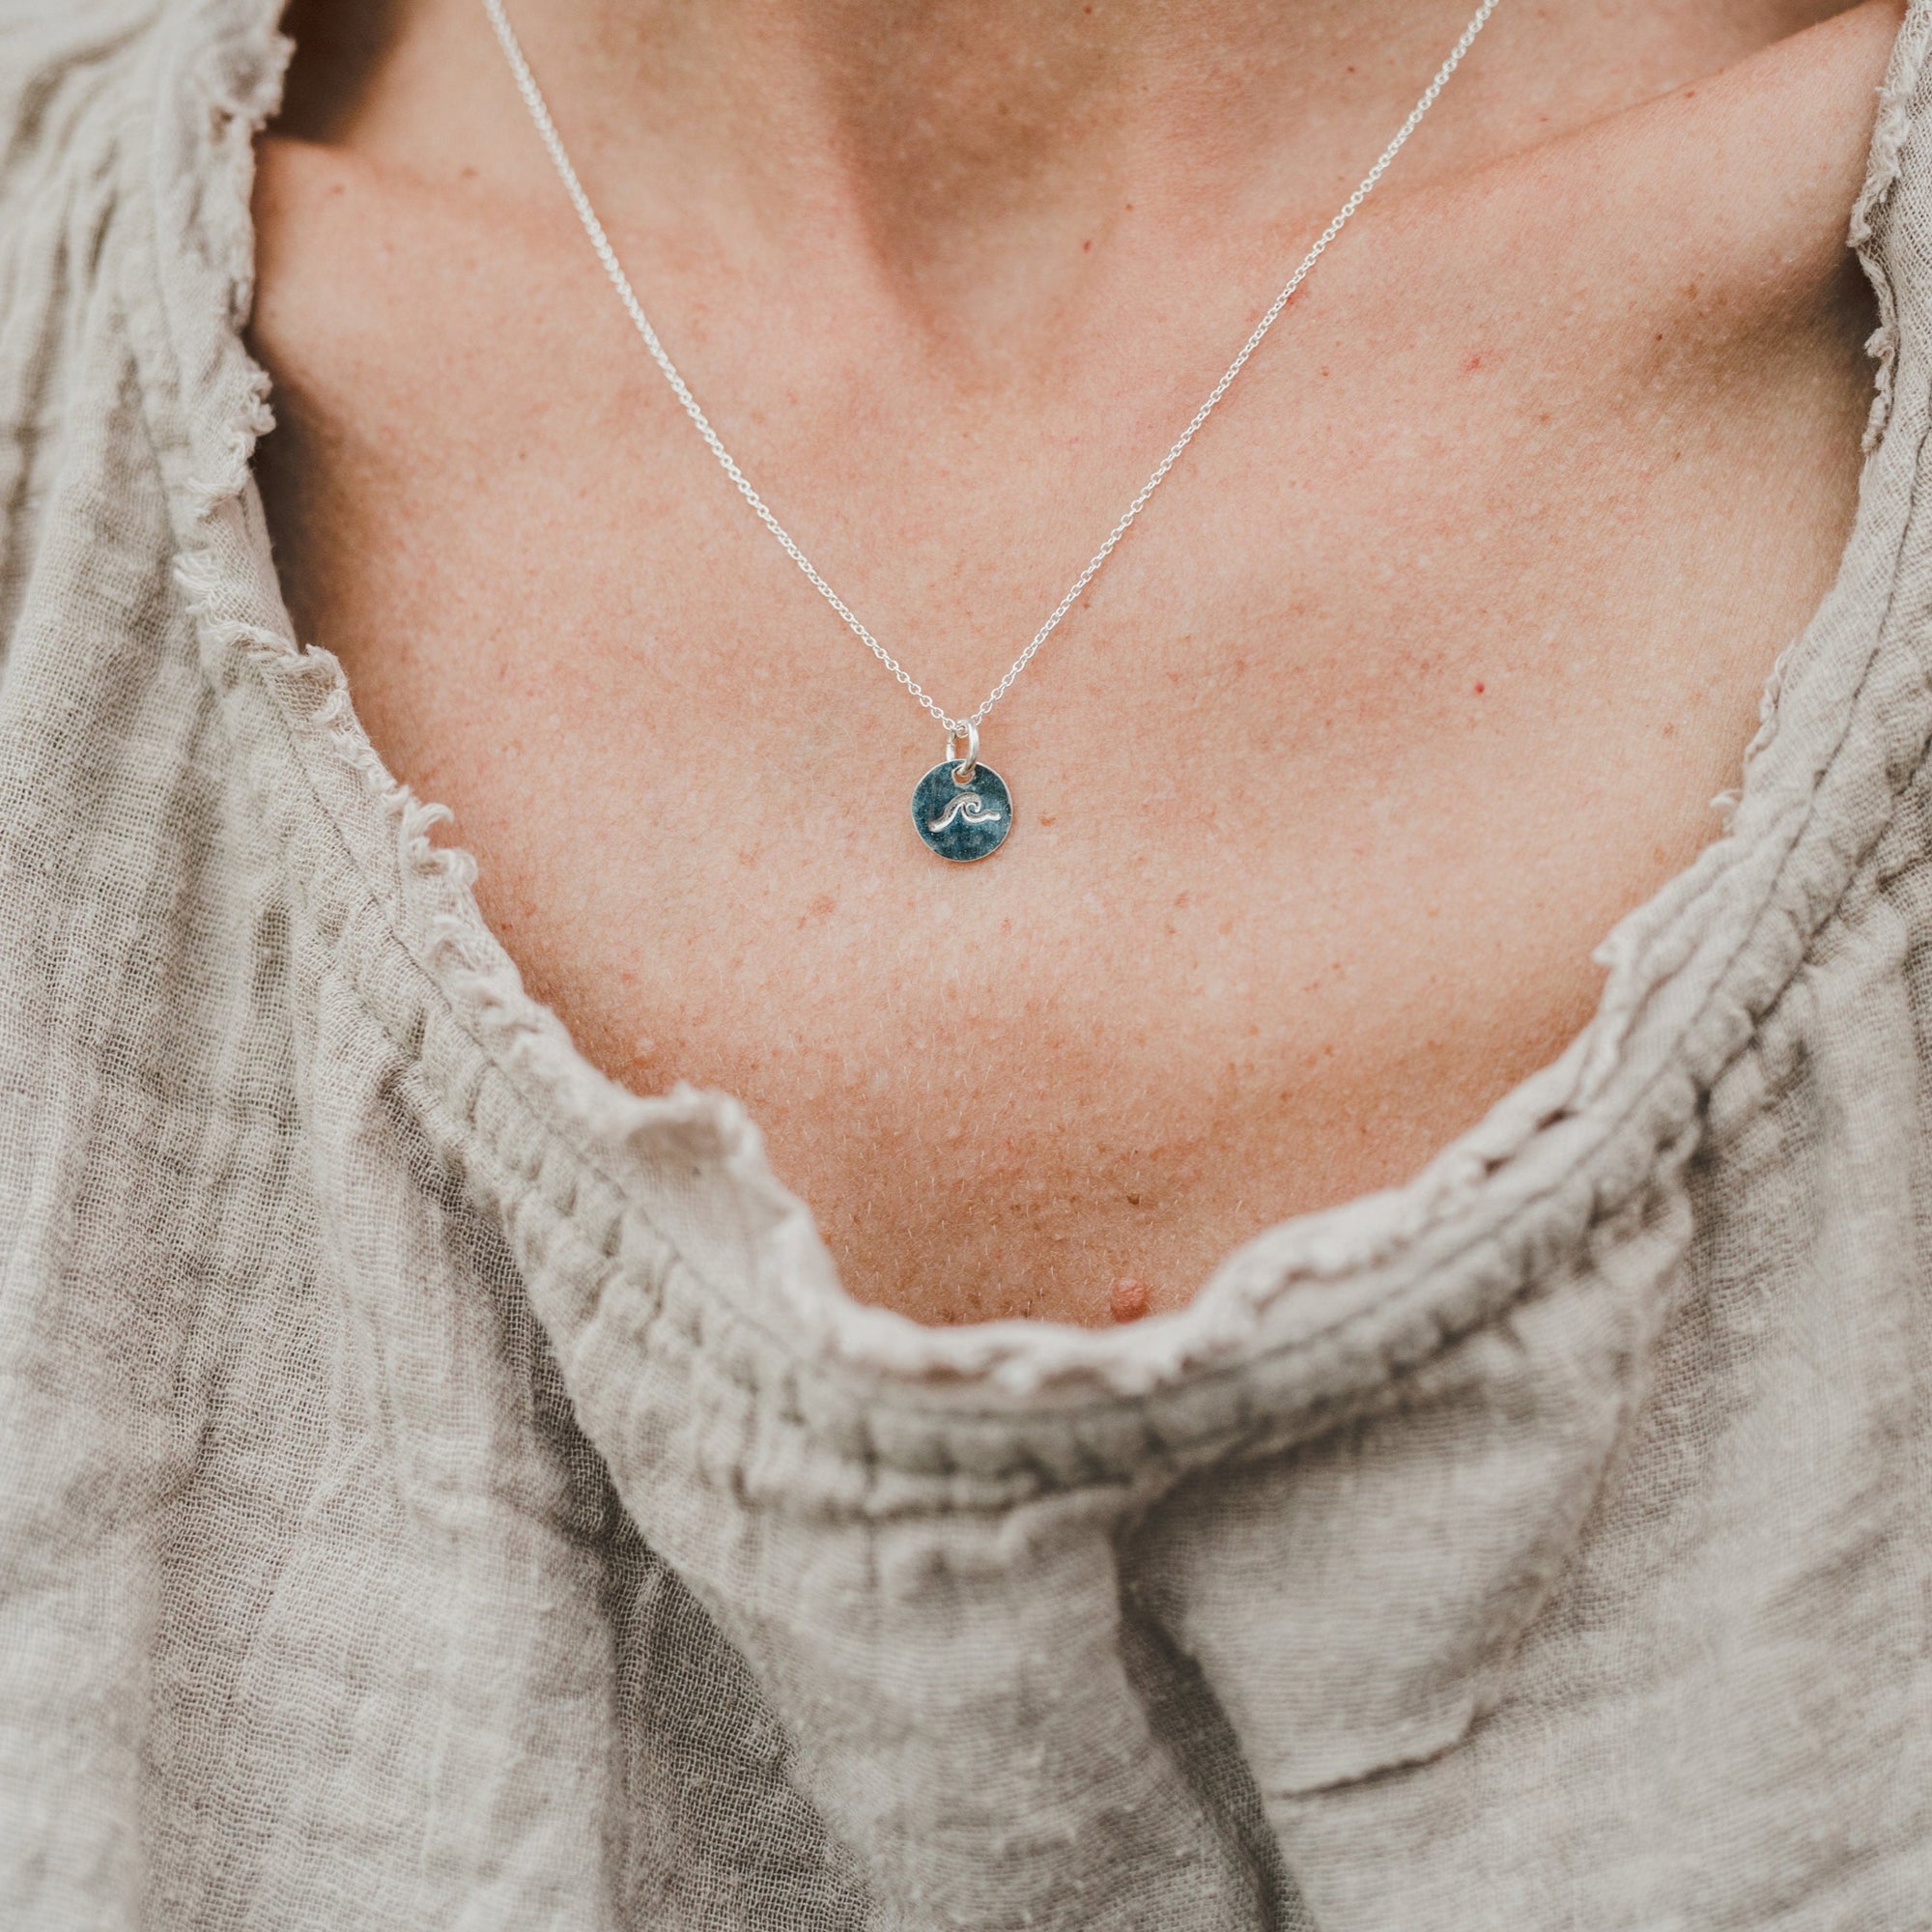 A close-up of a person&#39;s neck showing a Swim the Sea Necklace by Becoming Jewelry, with a wave charm on a sterling silver chain, partially framed by a beige, textured neckline of a garment.